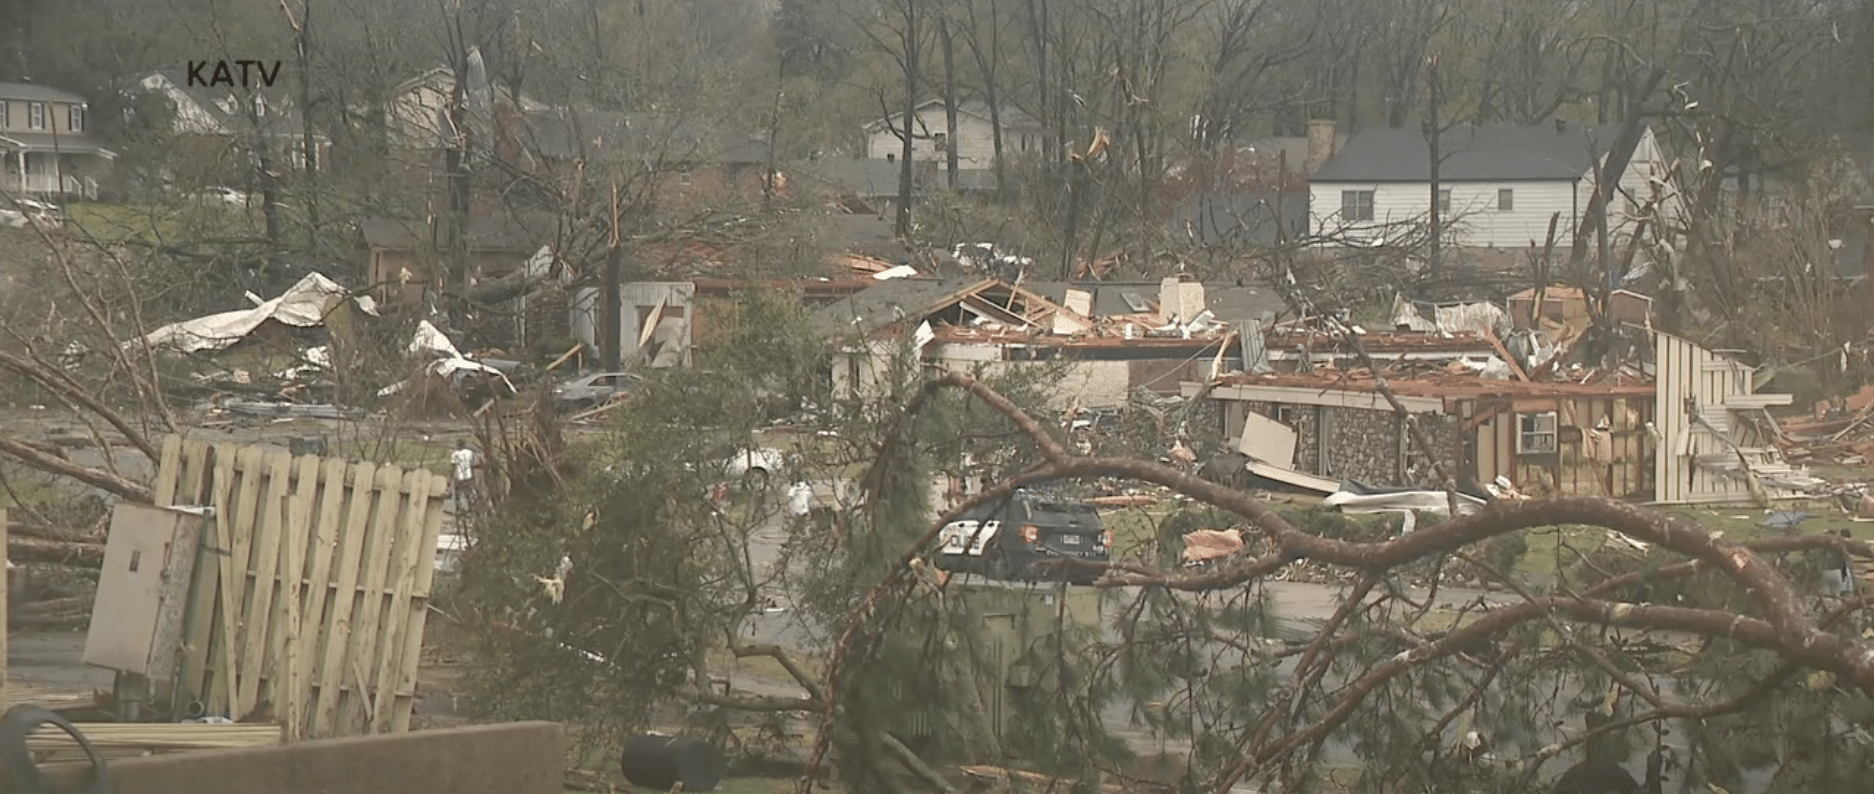 At least 3 dead, dozens trapped and more than 600 hundred injured as monster tornadoes cut a path of destruction through Arkansas